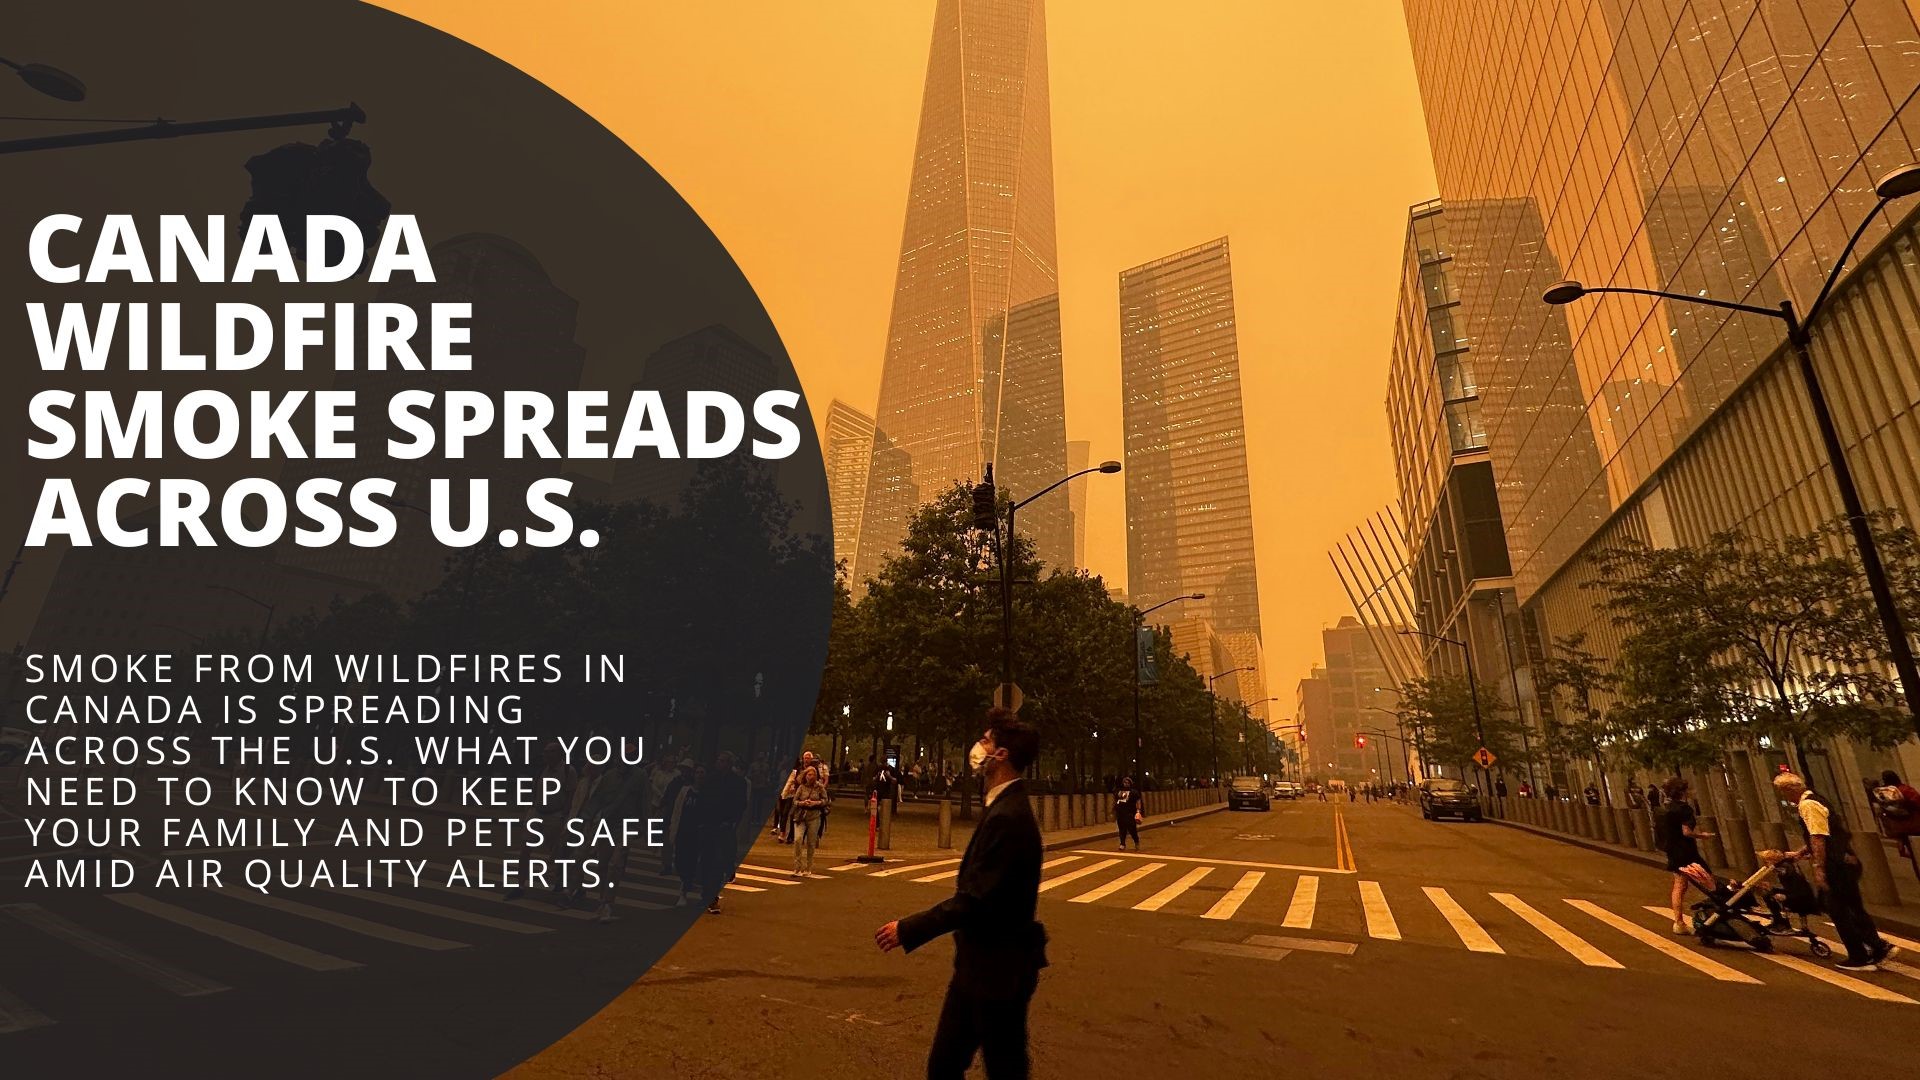 Smoke from wildfires in Canada is spreading across the U.S. What you need to know to keep your family and pets safe amid air quality alerts.